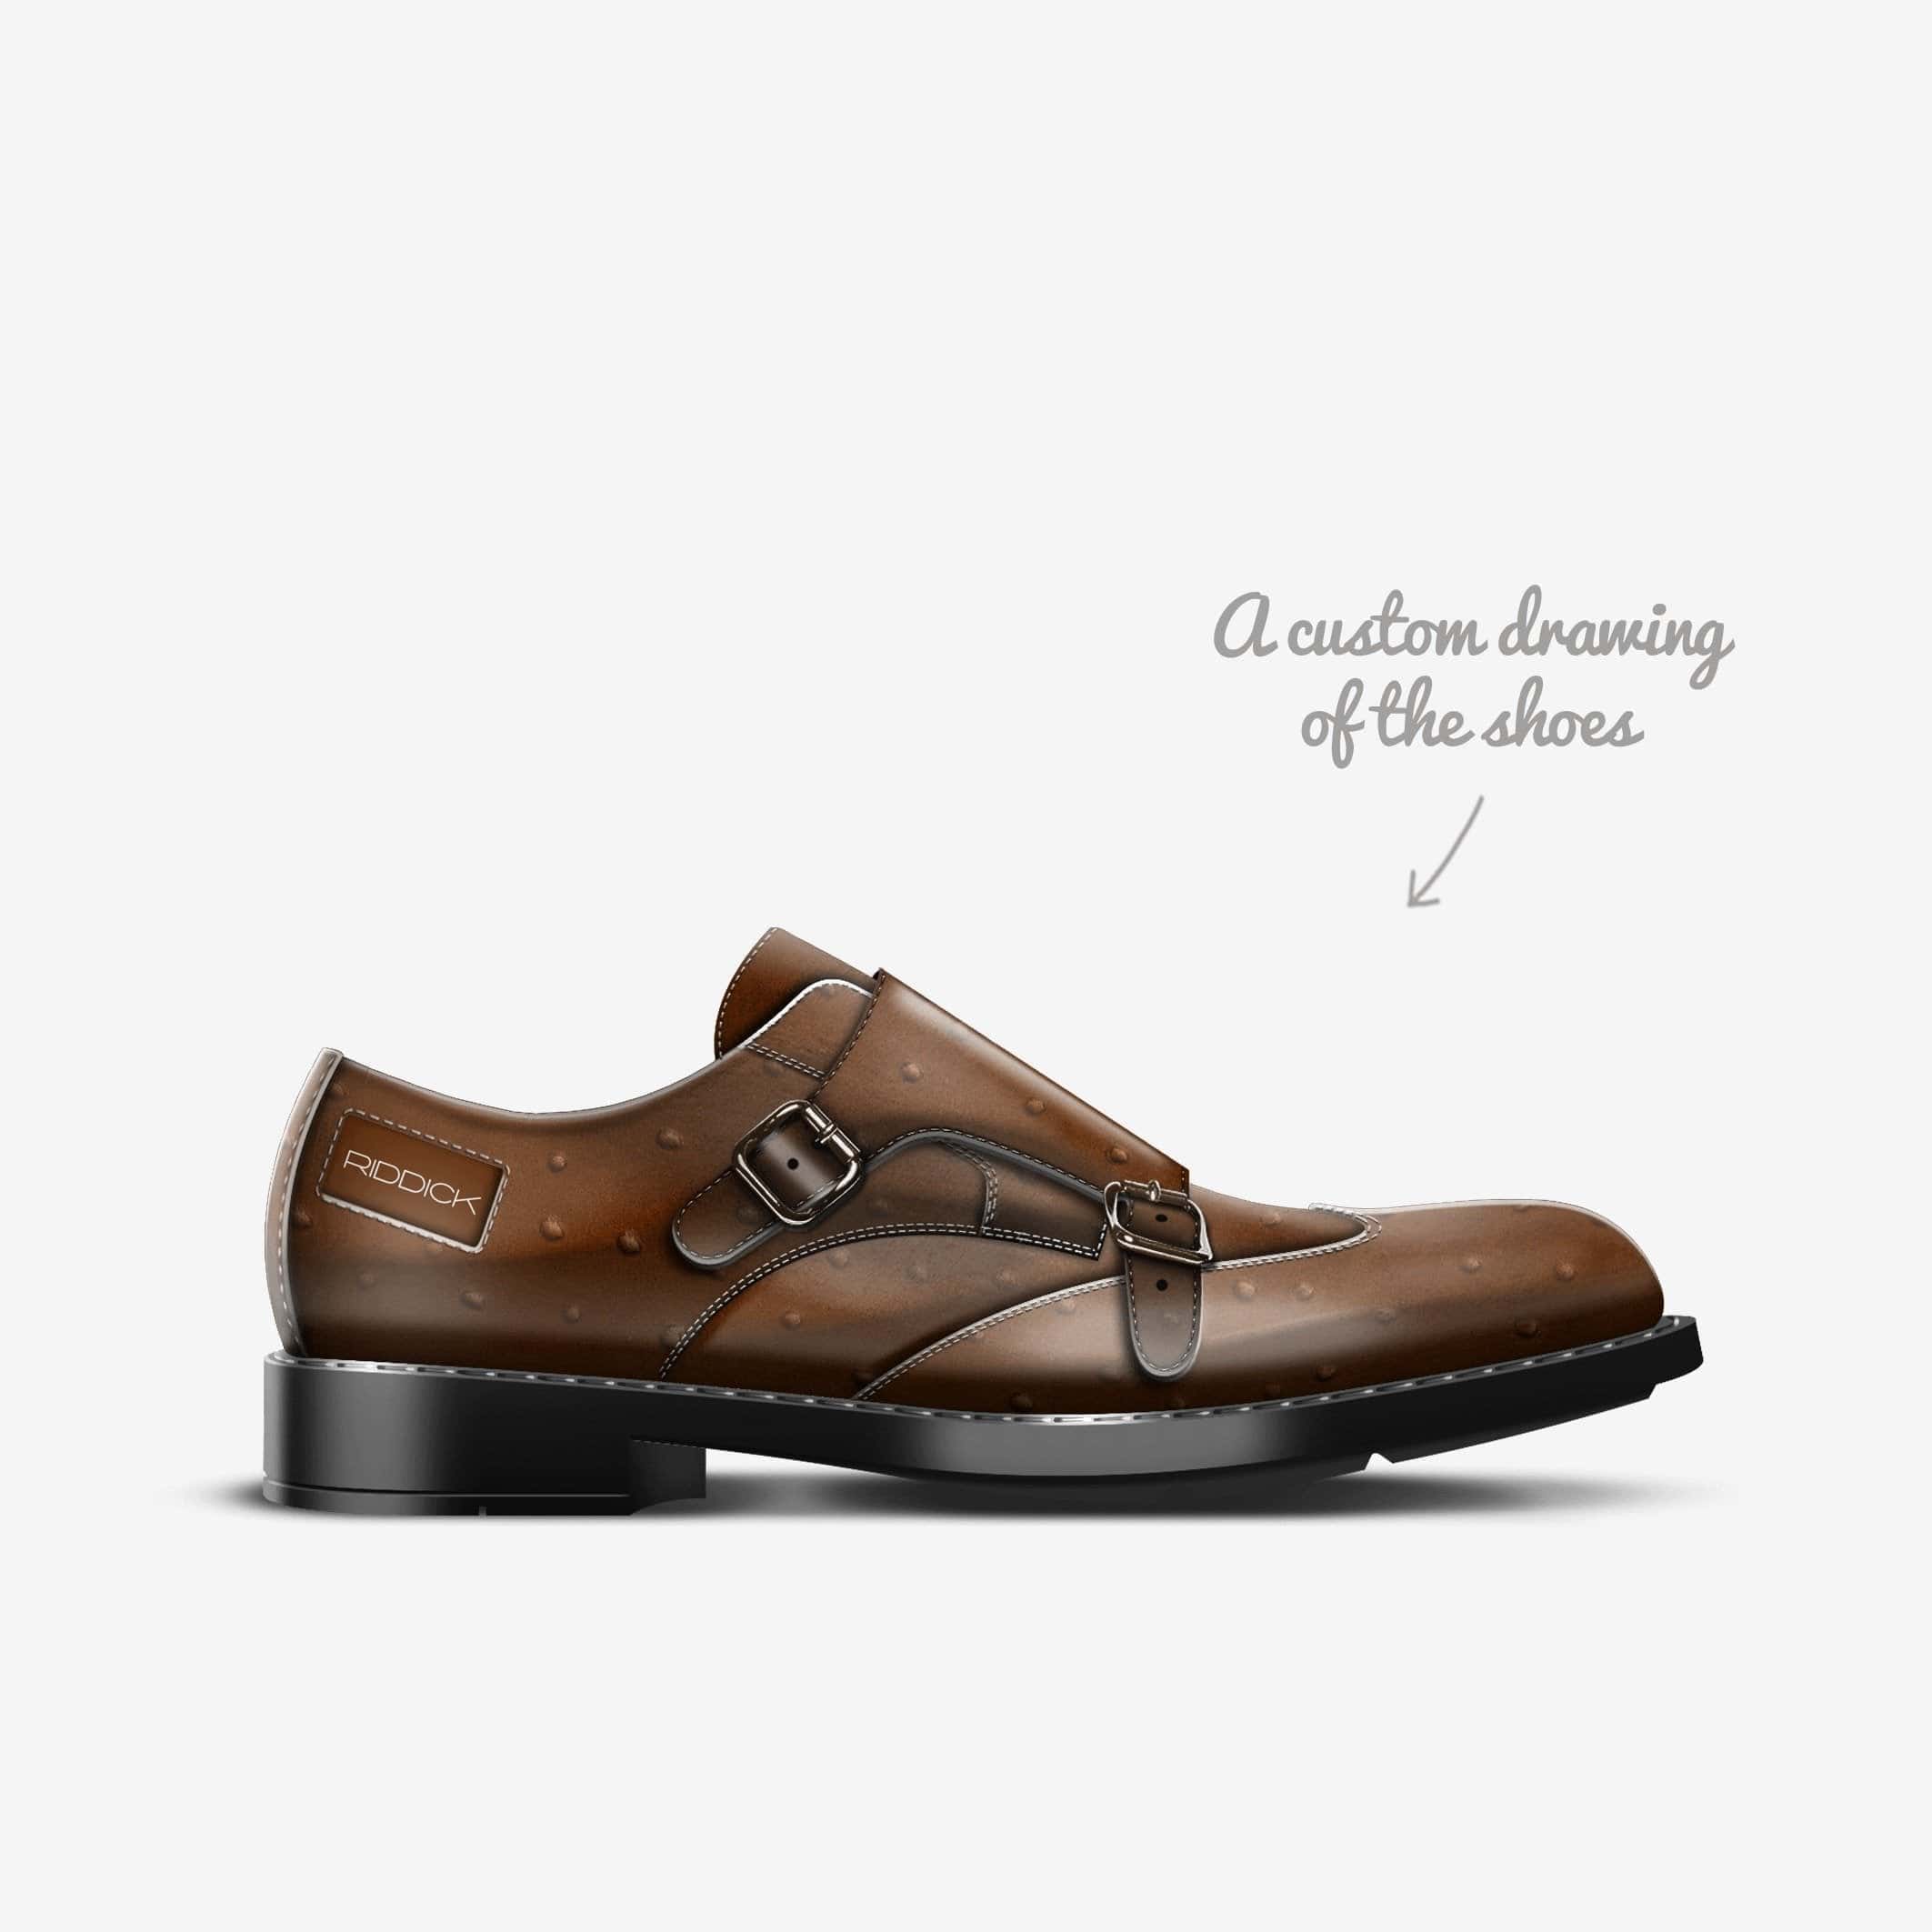 EXEC, STRAPPED (IN SADDLE BROWN) - Riddick Shoes Shoe Riddick Shoes   